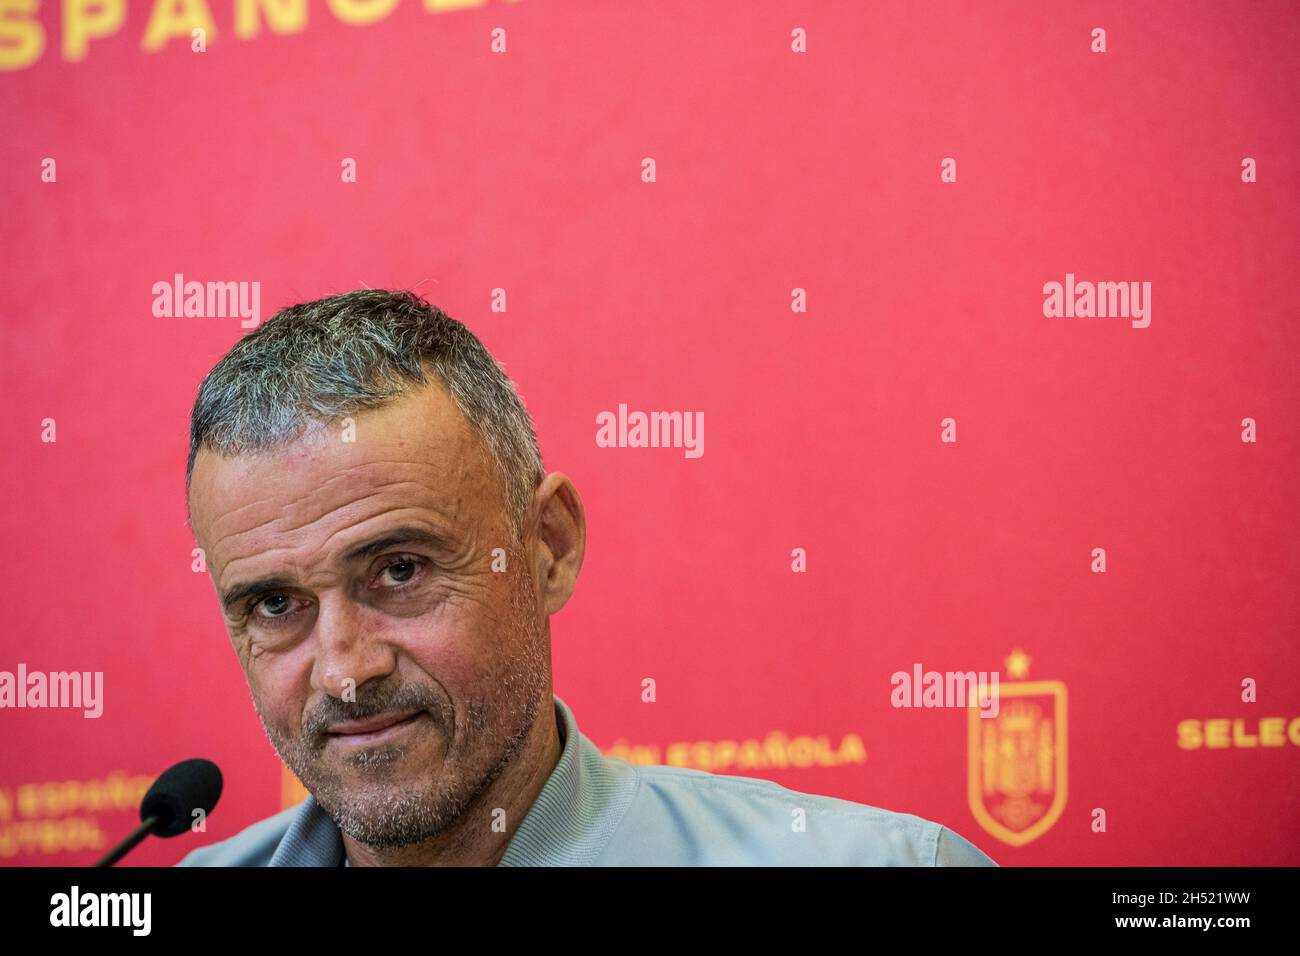 Madrid, Spain. 05th Nov, 2021. Luis Enrique, coach of the Spanish national soccer team speaks during the press conference at the Spanish Soccer Federation in Madrid. He made official the list of players who will play in the next matches of the Spanish team to qualify for the Qatar 2022 World Cup, against the teams of Greece and Sweden. (Photo by Diego RadamÈs/SOPA Images/Sipa USA) Credit: Sipa USA/Alamy Live News Stock Photo